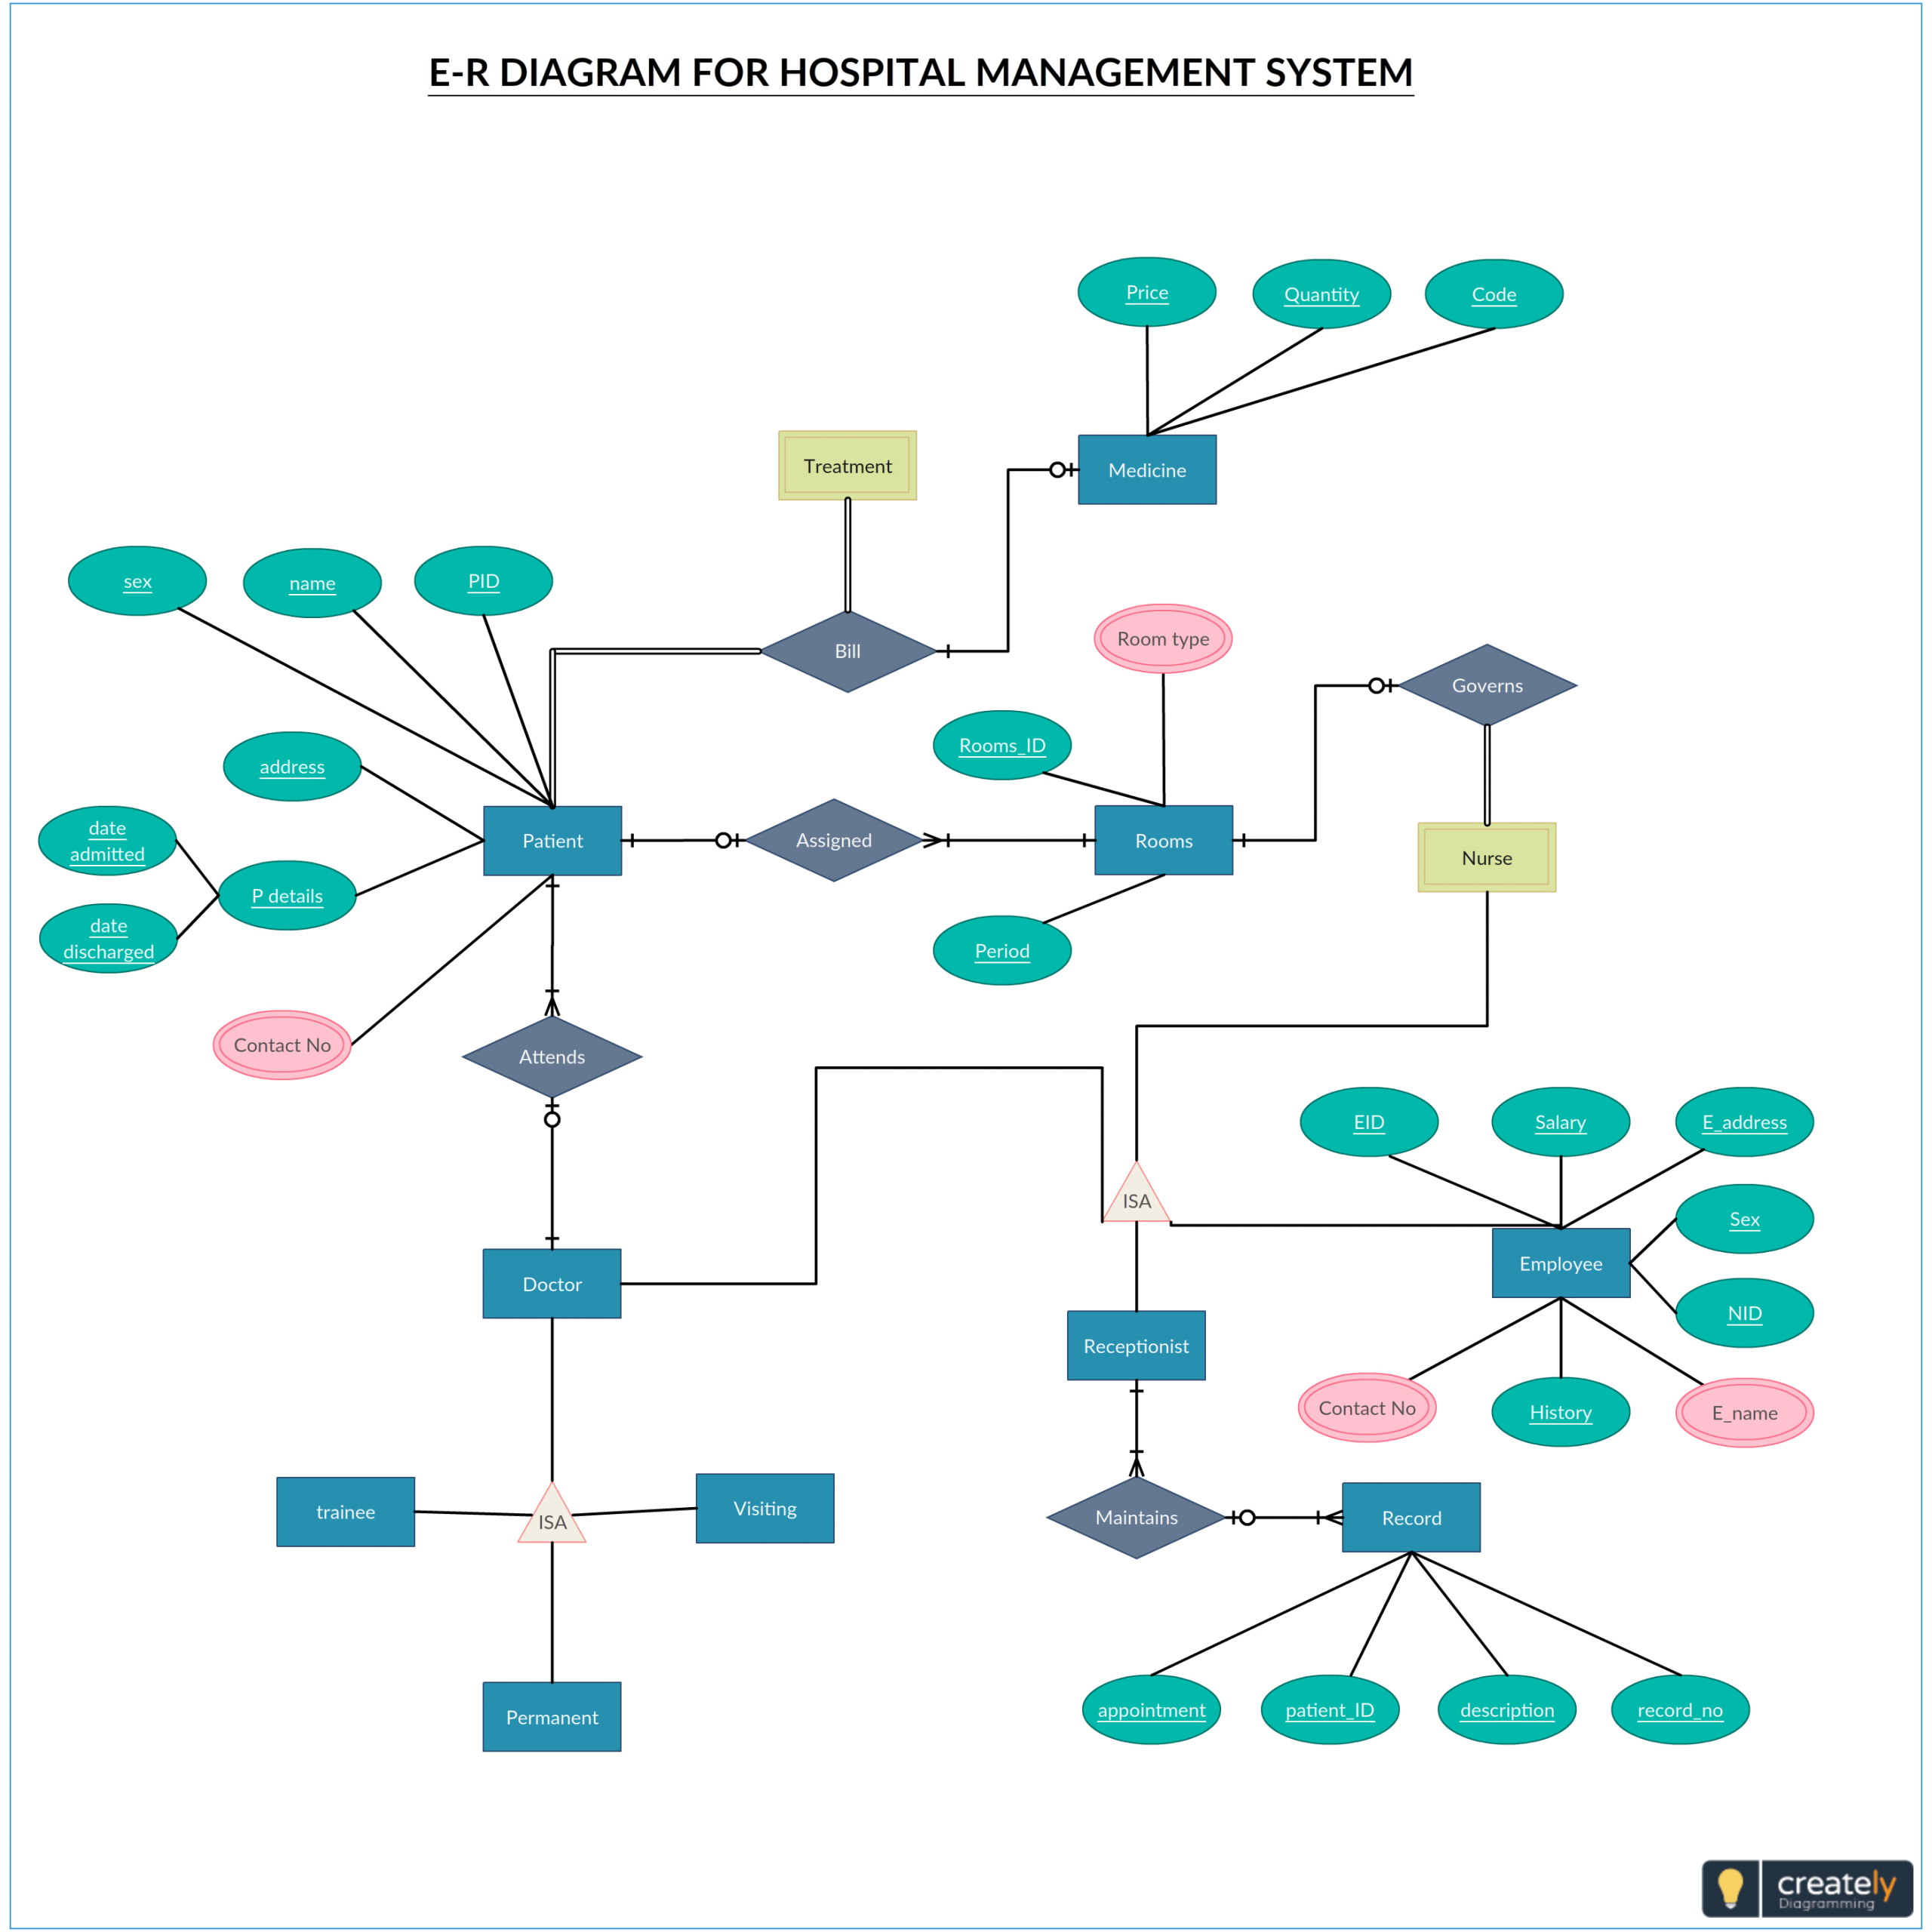 Pincreately On Entity Relationship Diagram Templates In with Er Diagram For Hospital